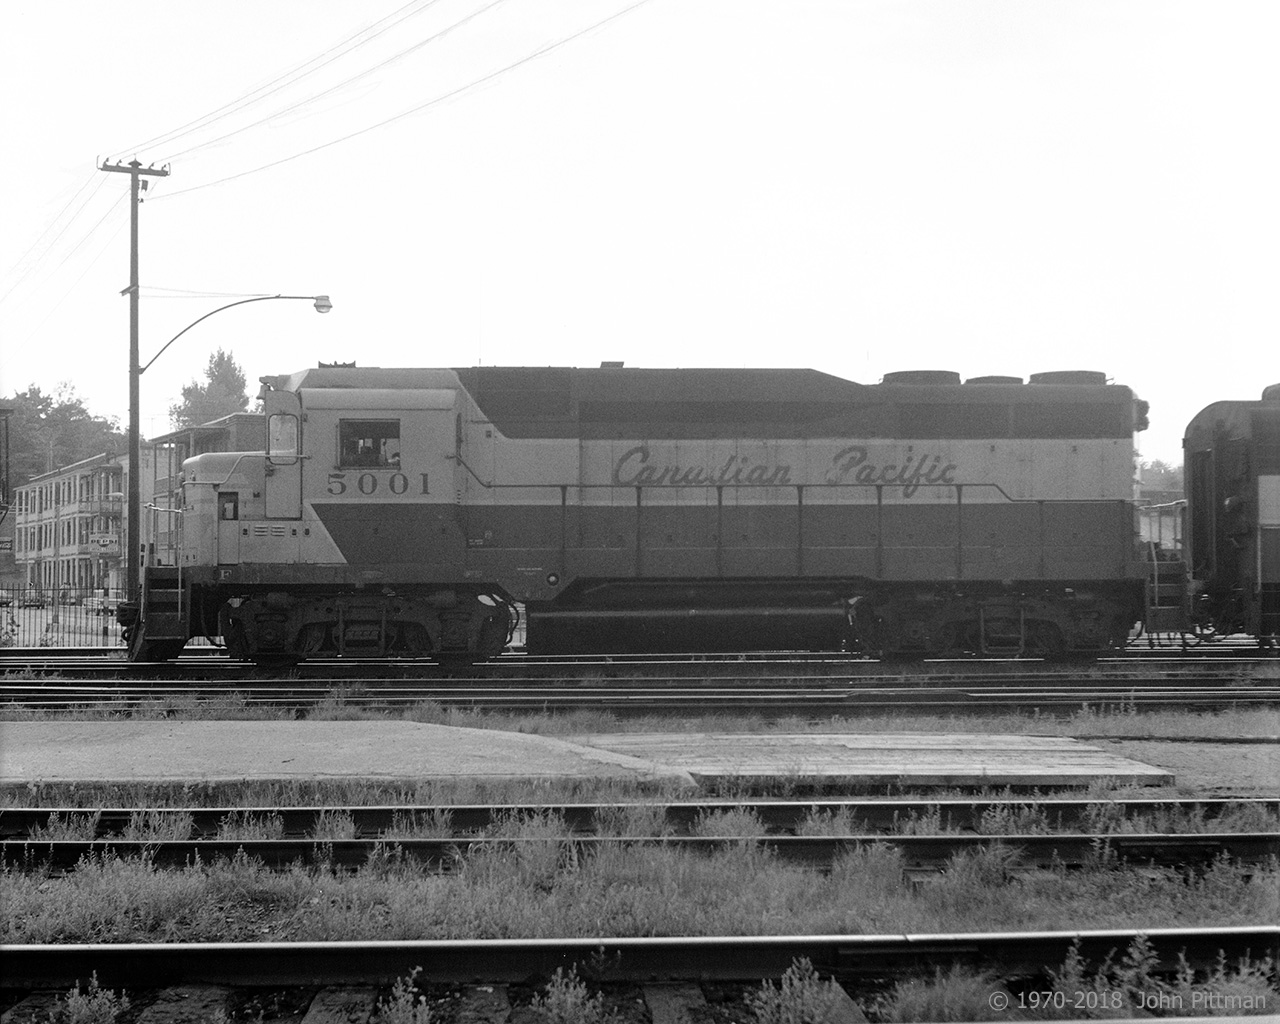 CP 5001, one of 2 GP30's sold in Canada, is just starting the afternoon freight moving at Trois-Rivieres, returning to Montreal with quite a number of newsprint boxcars loaded at the local paper mills and other freight. The trailing unit on this occasion is an FA-2.
In 1970 I saw predominantly 4-axle MLW units on the afternoon freight returning to Montreal from Trois-Rivieres. Three units was typical, otherwise 2 or 4; they would include mixtures of RS11, RS10, RS3, FA, FB, and C424. Other than the occasional freight FP7A, the first GM unit I encountered was the GP35 - I heard its turbo-supercharger whine as I bicycled along the road beside the roundhouse, and wondered what I was about to see.
This GP30 was obviously related but styled differently from the GP35, while its CP class id plate DRF-22a showed lower horsepower than GP35's DRF-25a (or b,c,d).
At the time I valued direct side views of locomotives far above any other angle. The only place that worked well for that in T-R was the station side of the tracks. Unfortunately that put me on the east side, not so good when the sun is going down to the west - most of my best afternoon shots from this era were taken when overcast.
This image of CP 5001, taken toward the setting sun, was very difficult to make a satisfactory black and white print from - only because of its rarity did I save the negative. Fortunately photoshop is easier than darkroom burning, dodging and developing with chemicals. 
48 years separate my first GP30 and latest (BNSF GP39M) images; I hope to catch some more.